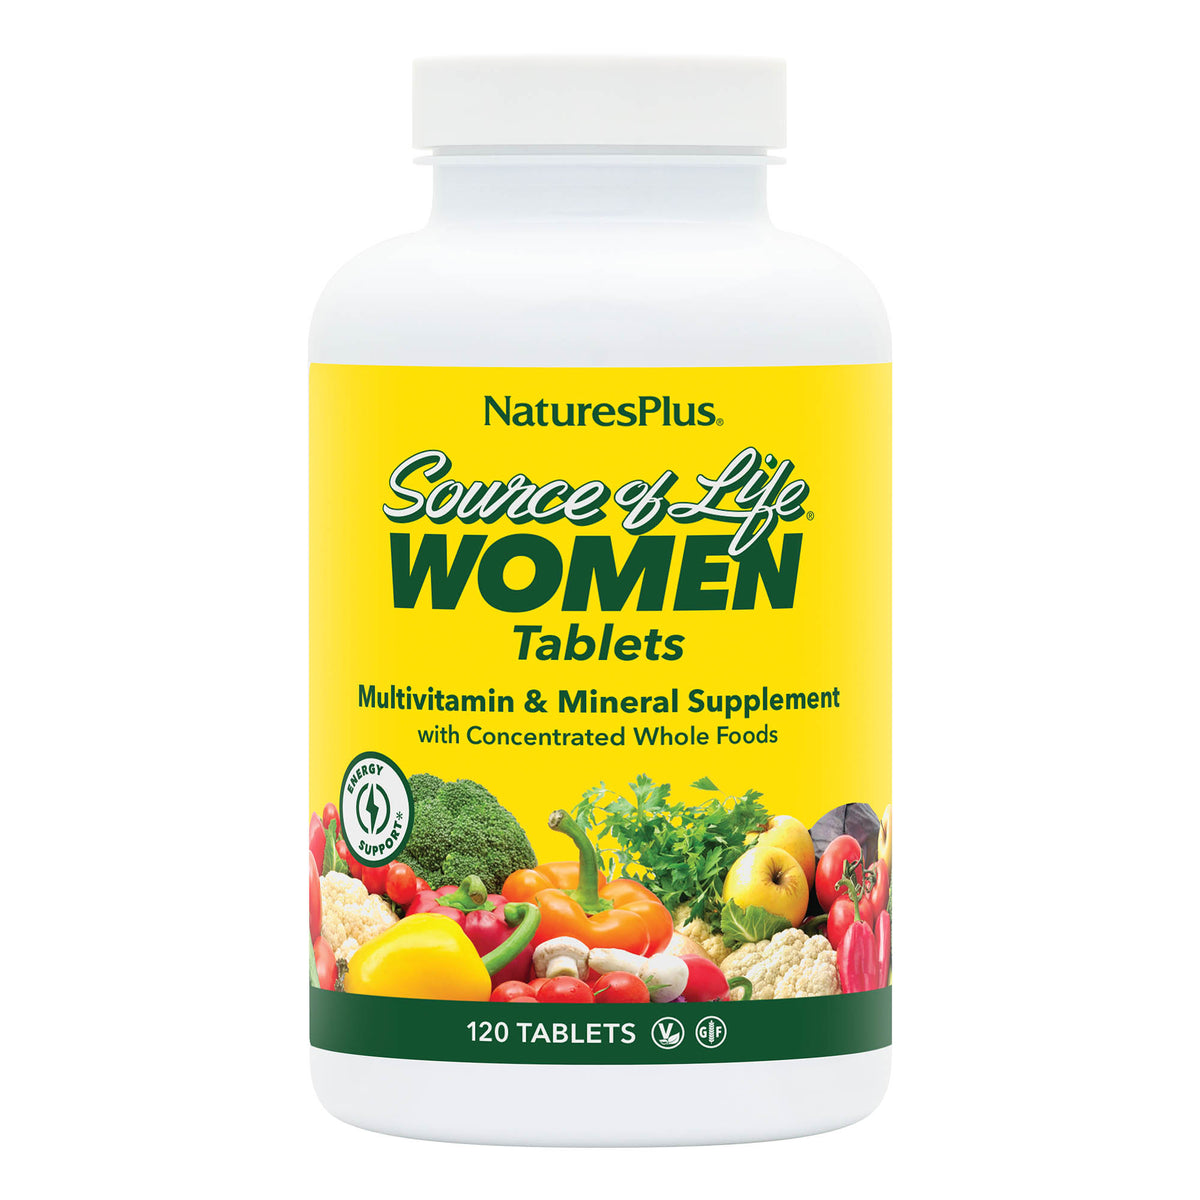 product image of Source of Life® Women Multivitamin Tablets containing 120 Count